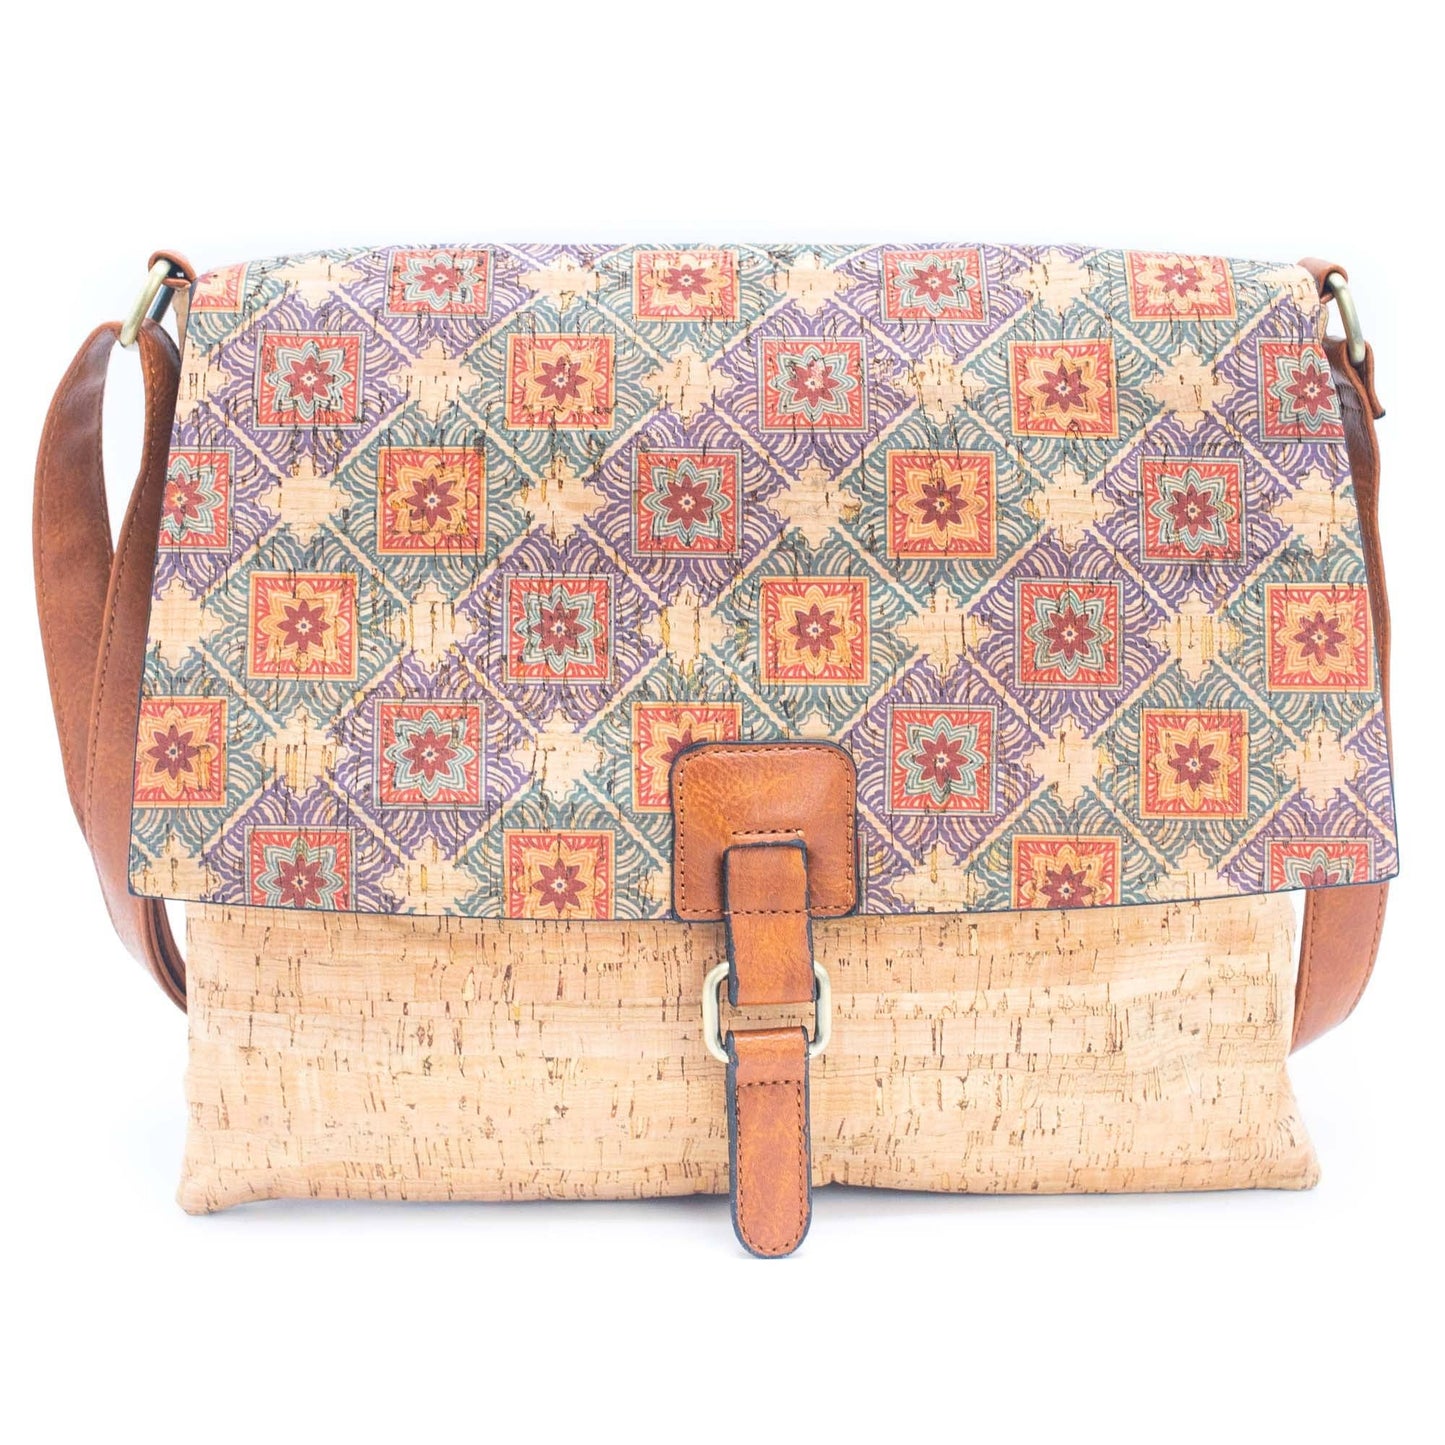 Cork Crossbody Bag with Mosaic and Floral Prints BAGD-464-15